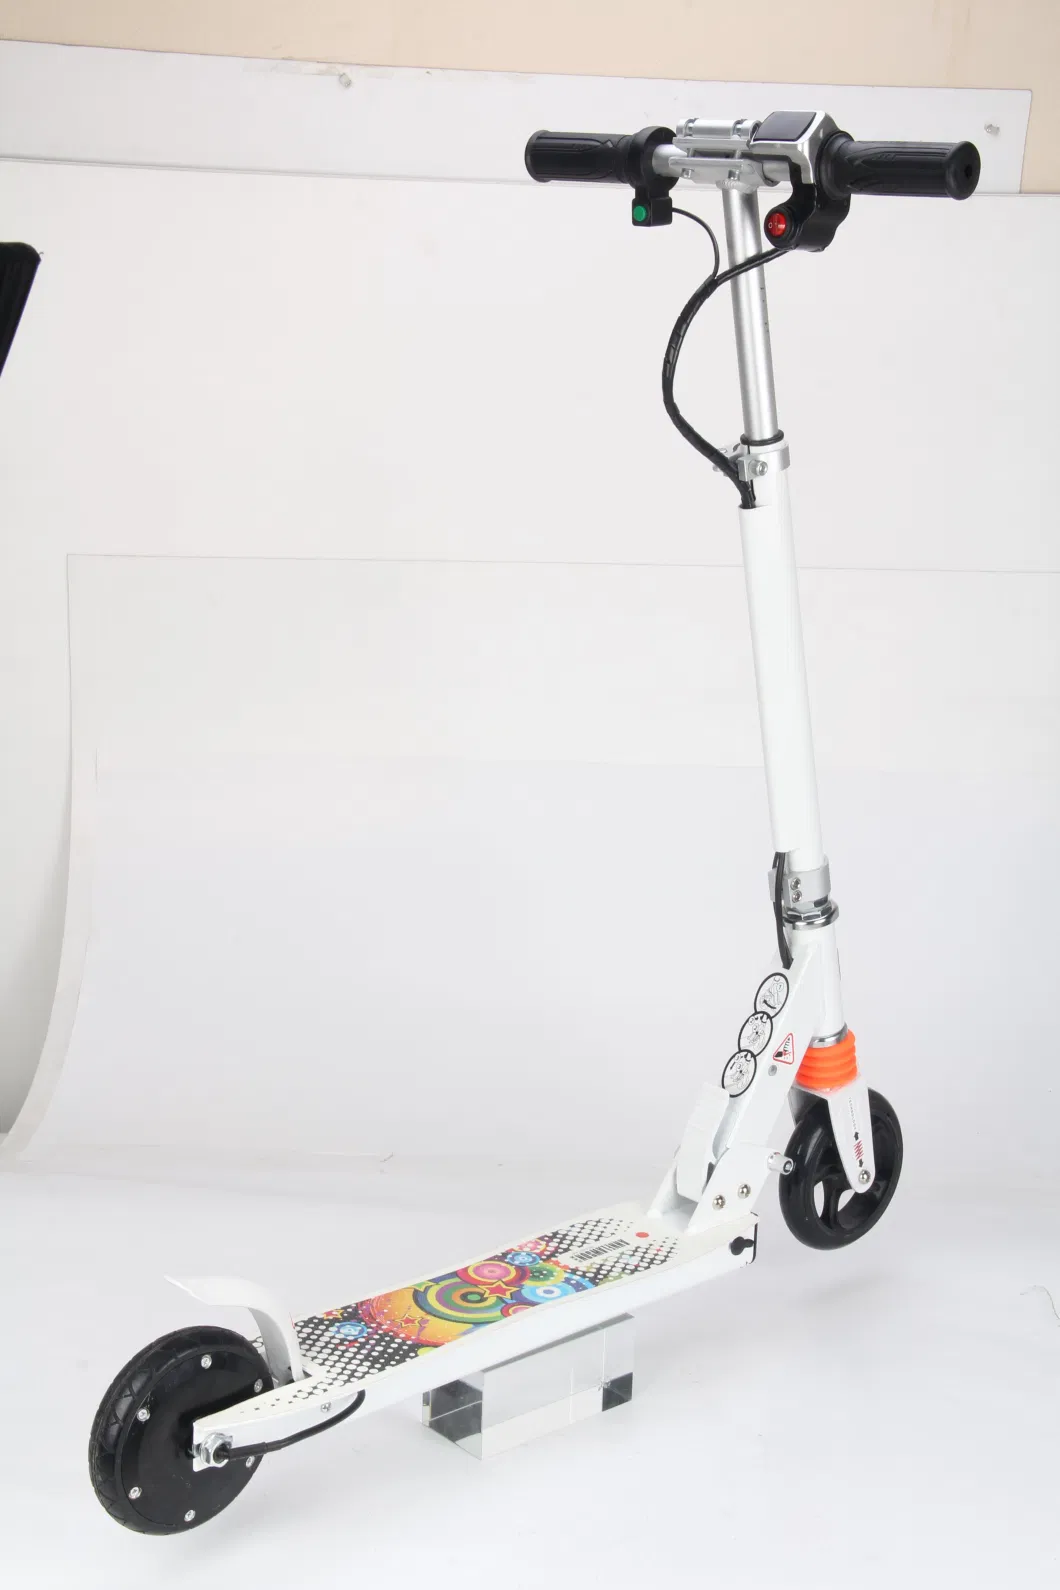 New Design 180W 22V Foldable 2 Wheel Kids Electric Kick Scooter Escooter